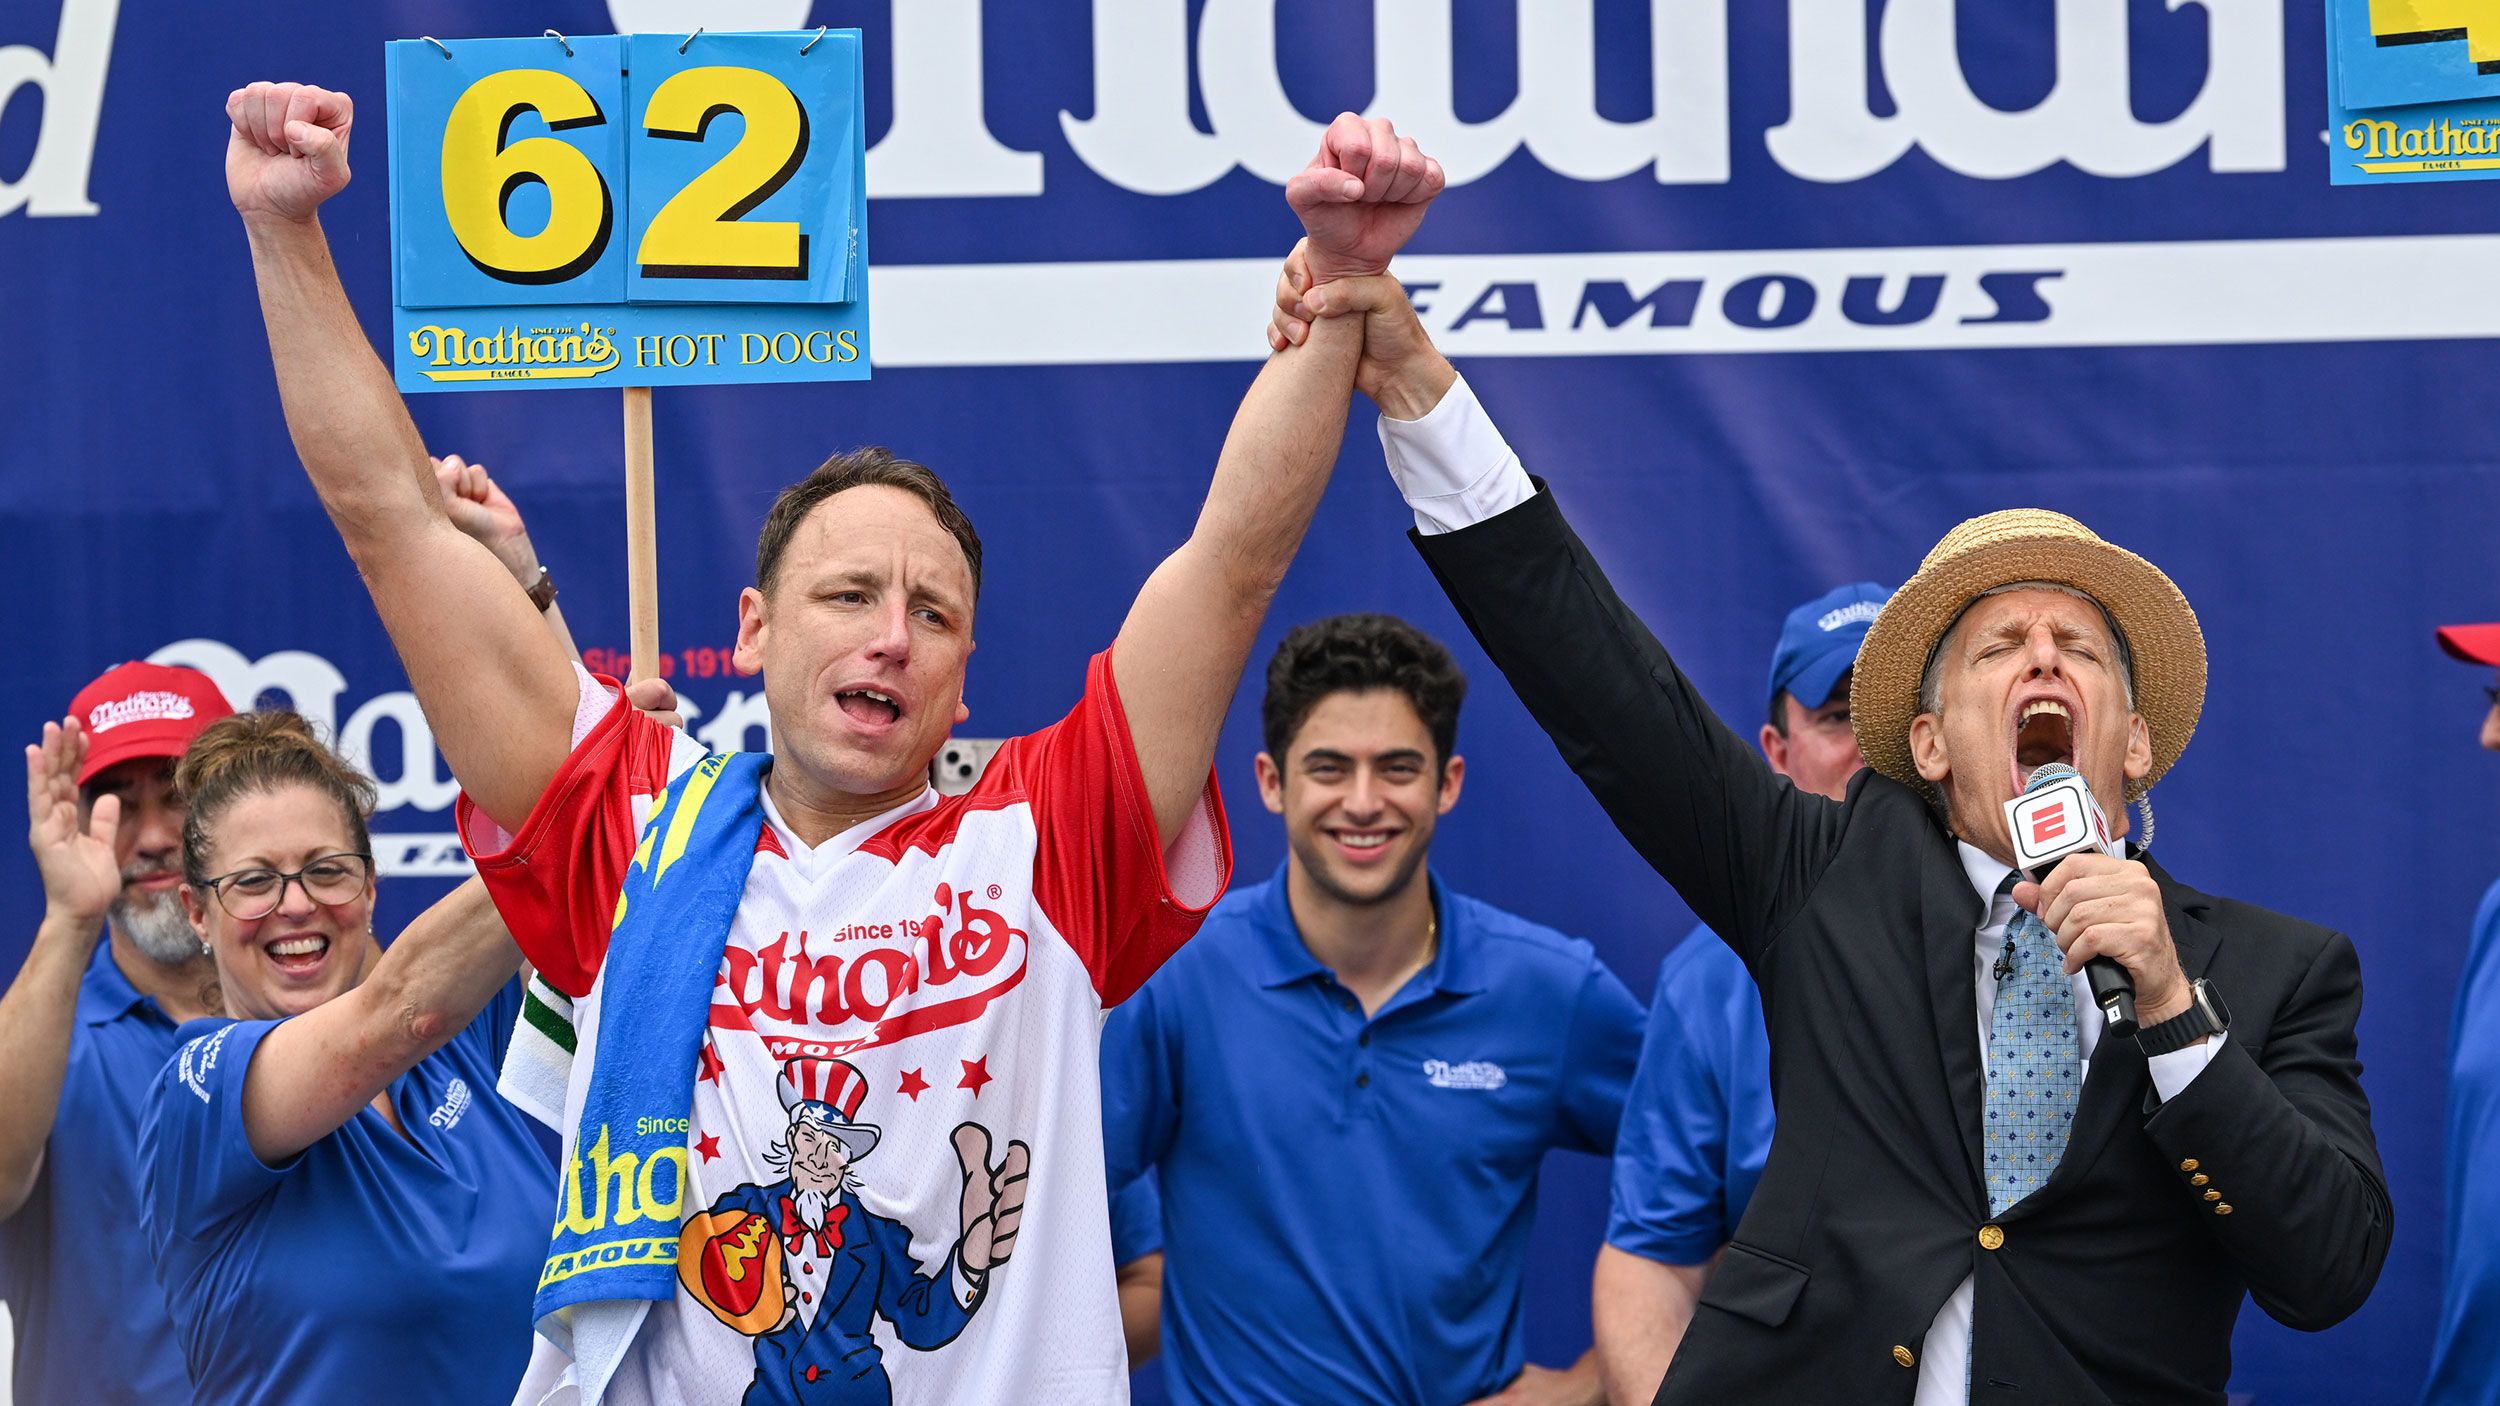 Nathans Hotdogs Contest 2023 Winner: The Ultimate Hot Dog Champion!